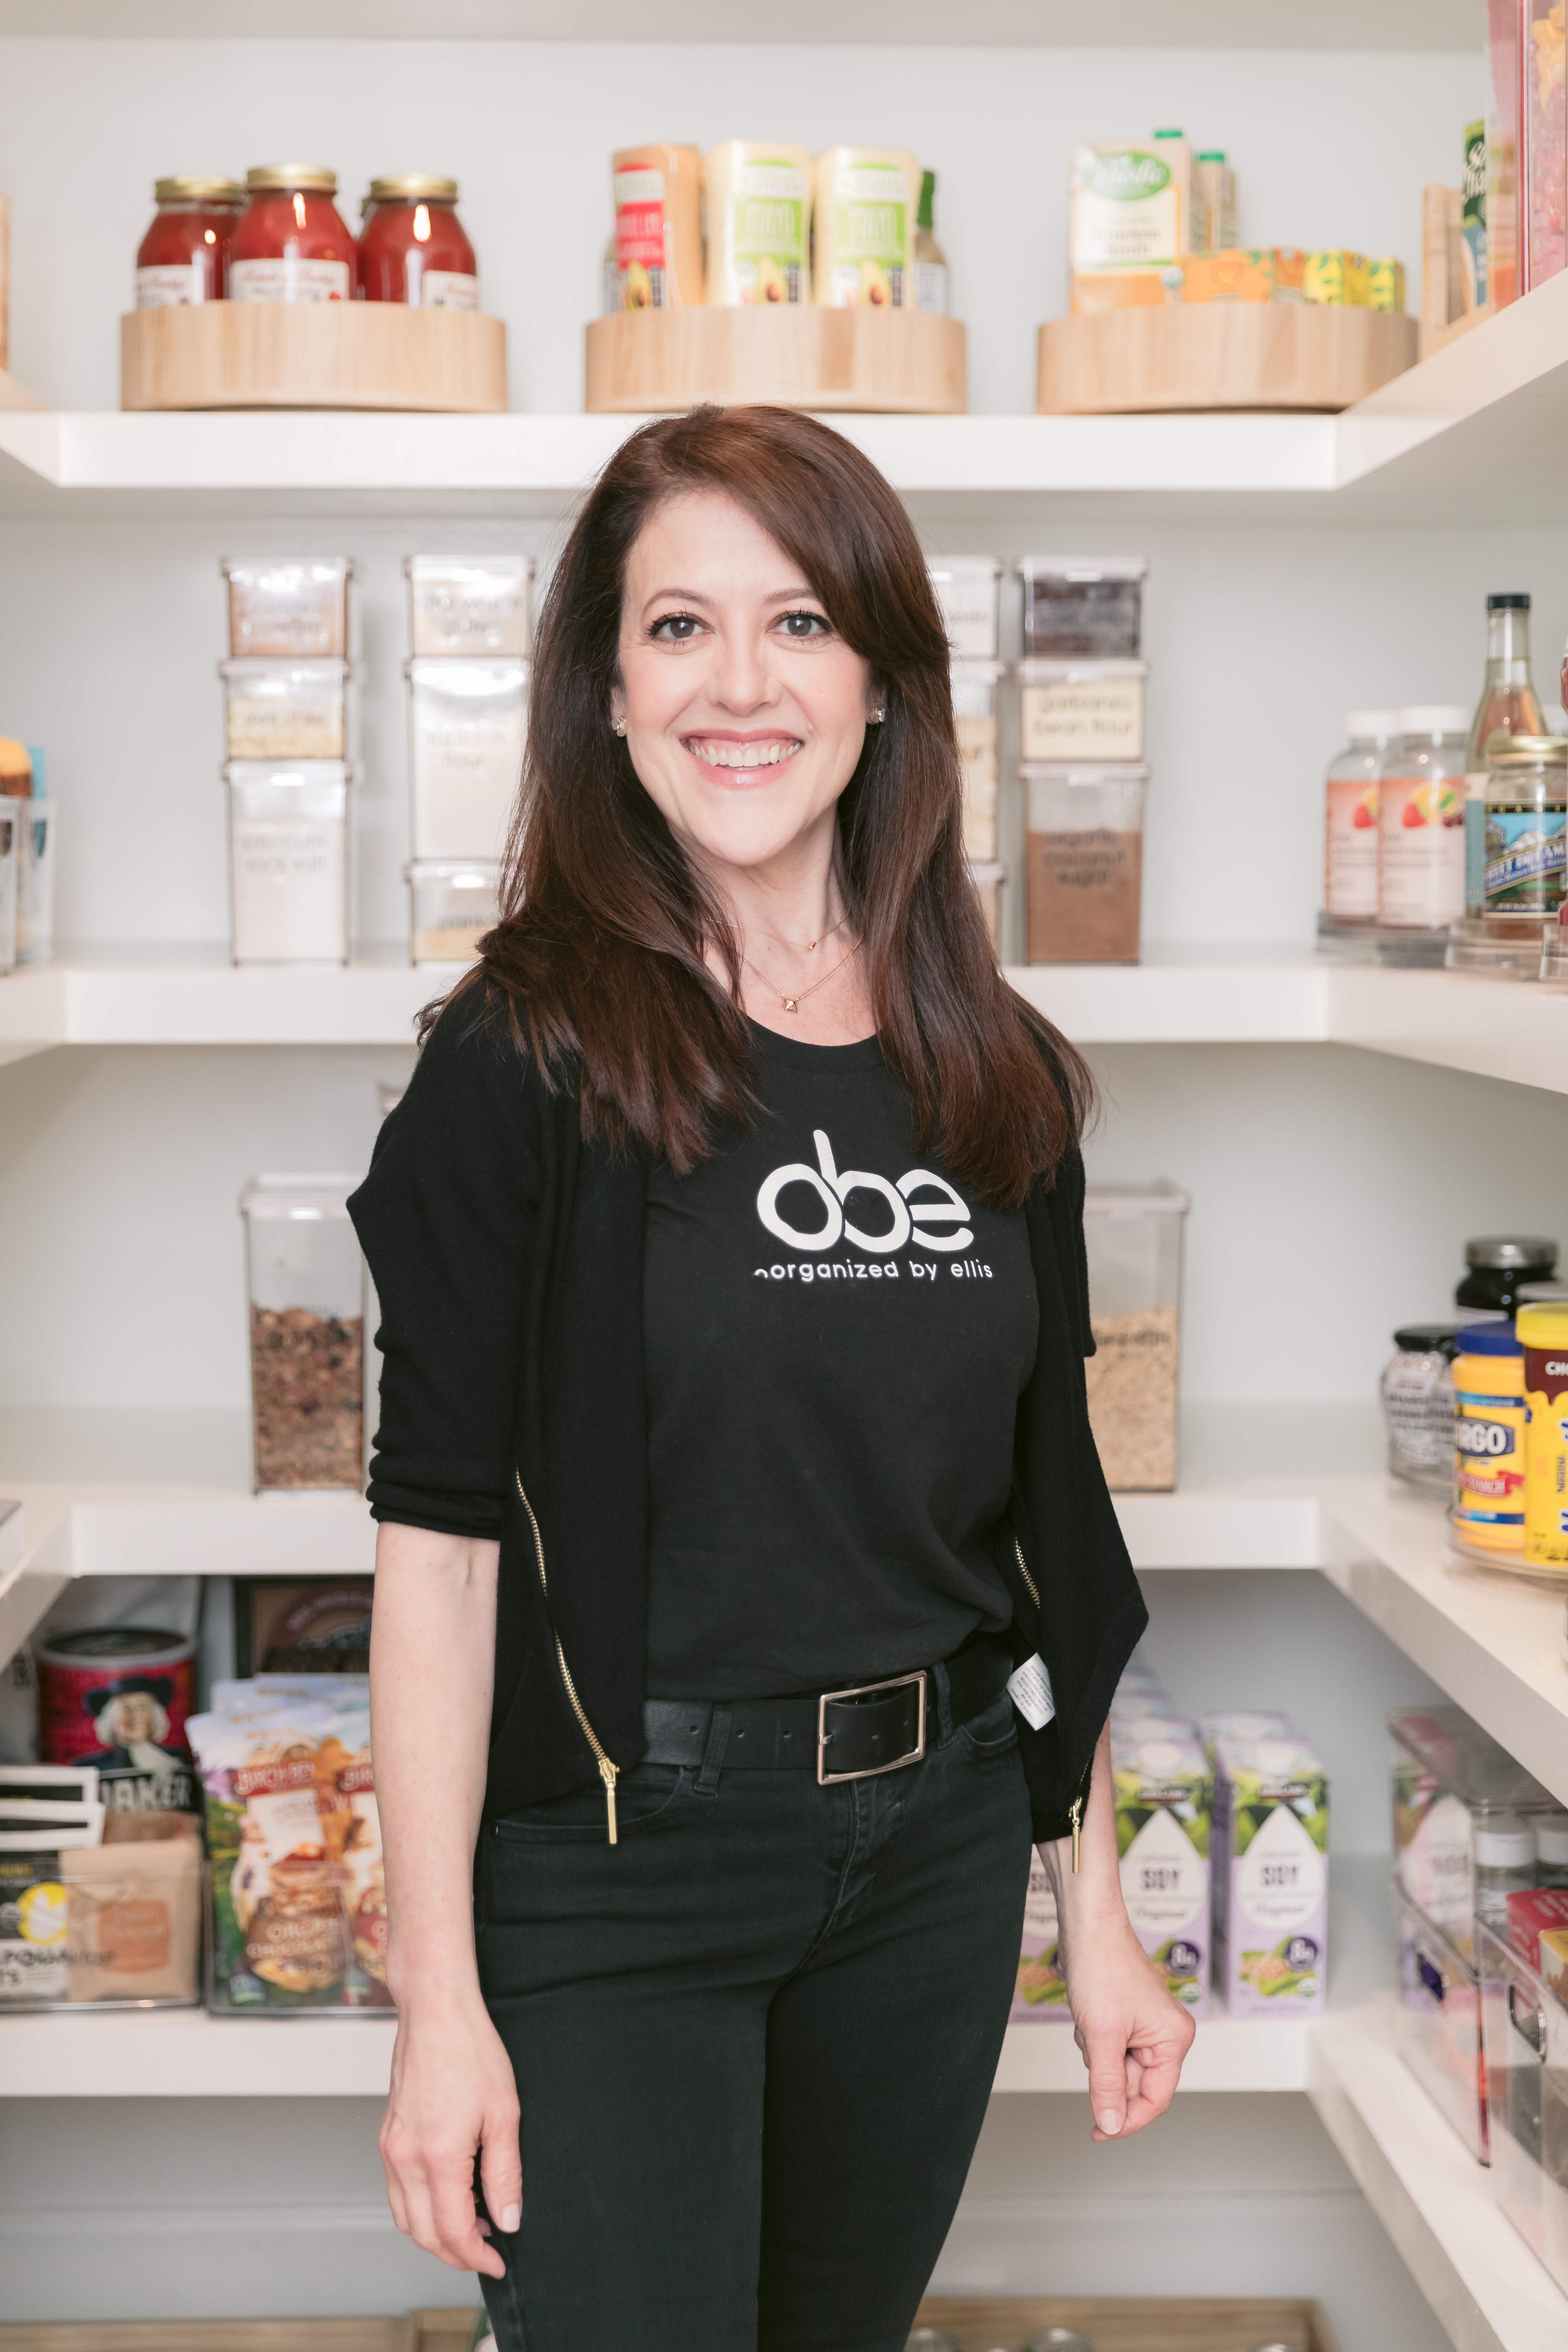 A woman standing in a kitchen with shelves full of gluten-free food.